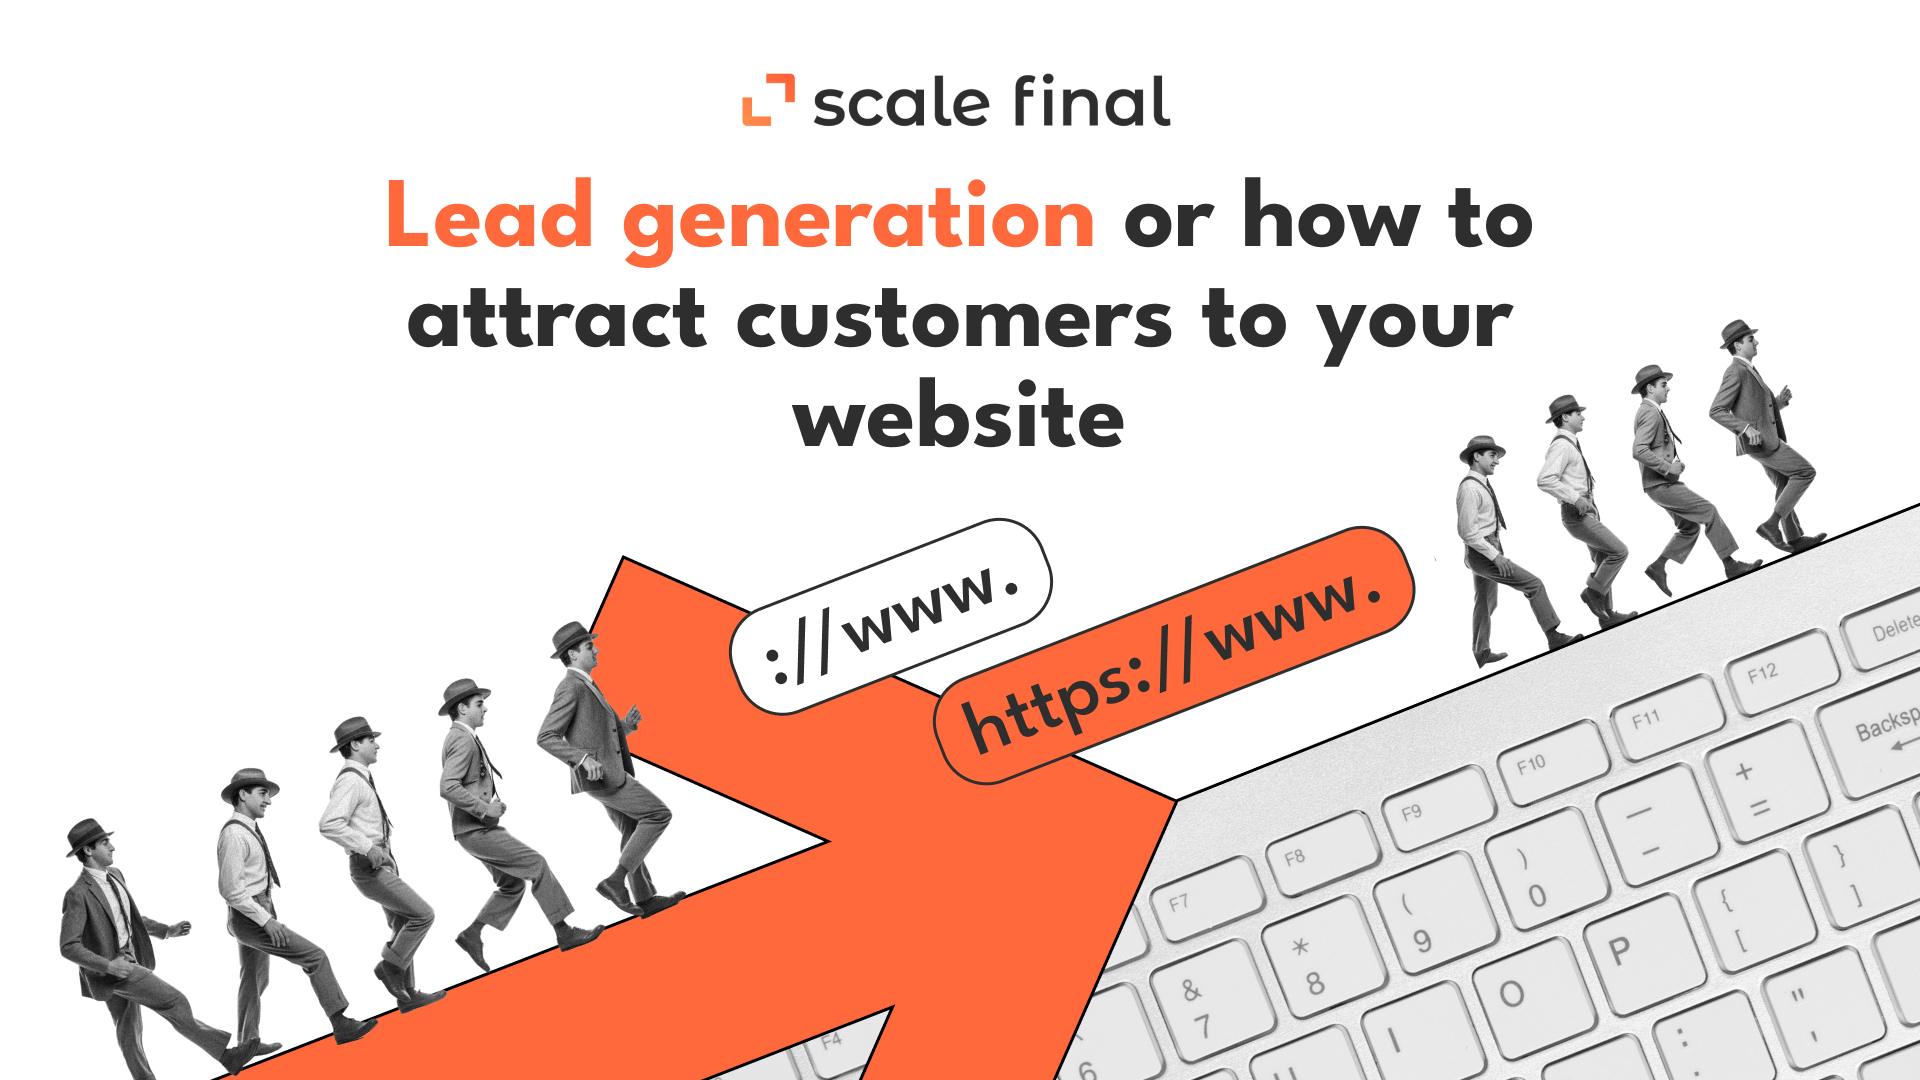 Lead generation or how to attract customers to your website